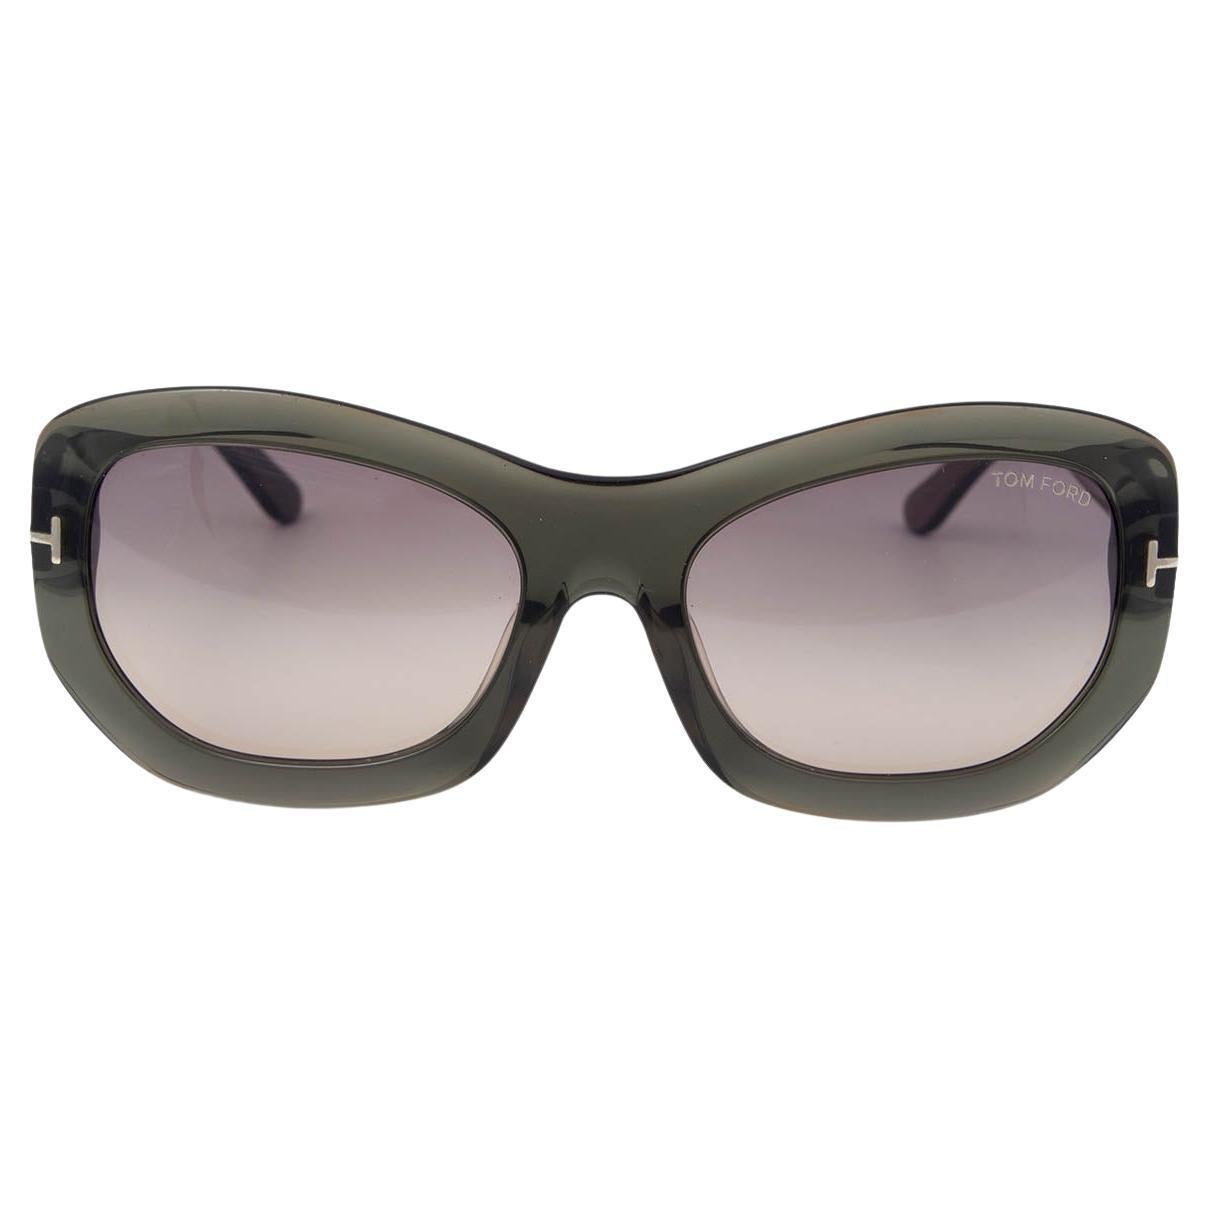 TOM FORD sage green AMY Oval Sunglasses TF382